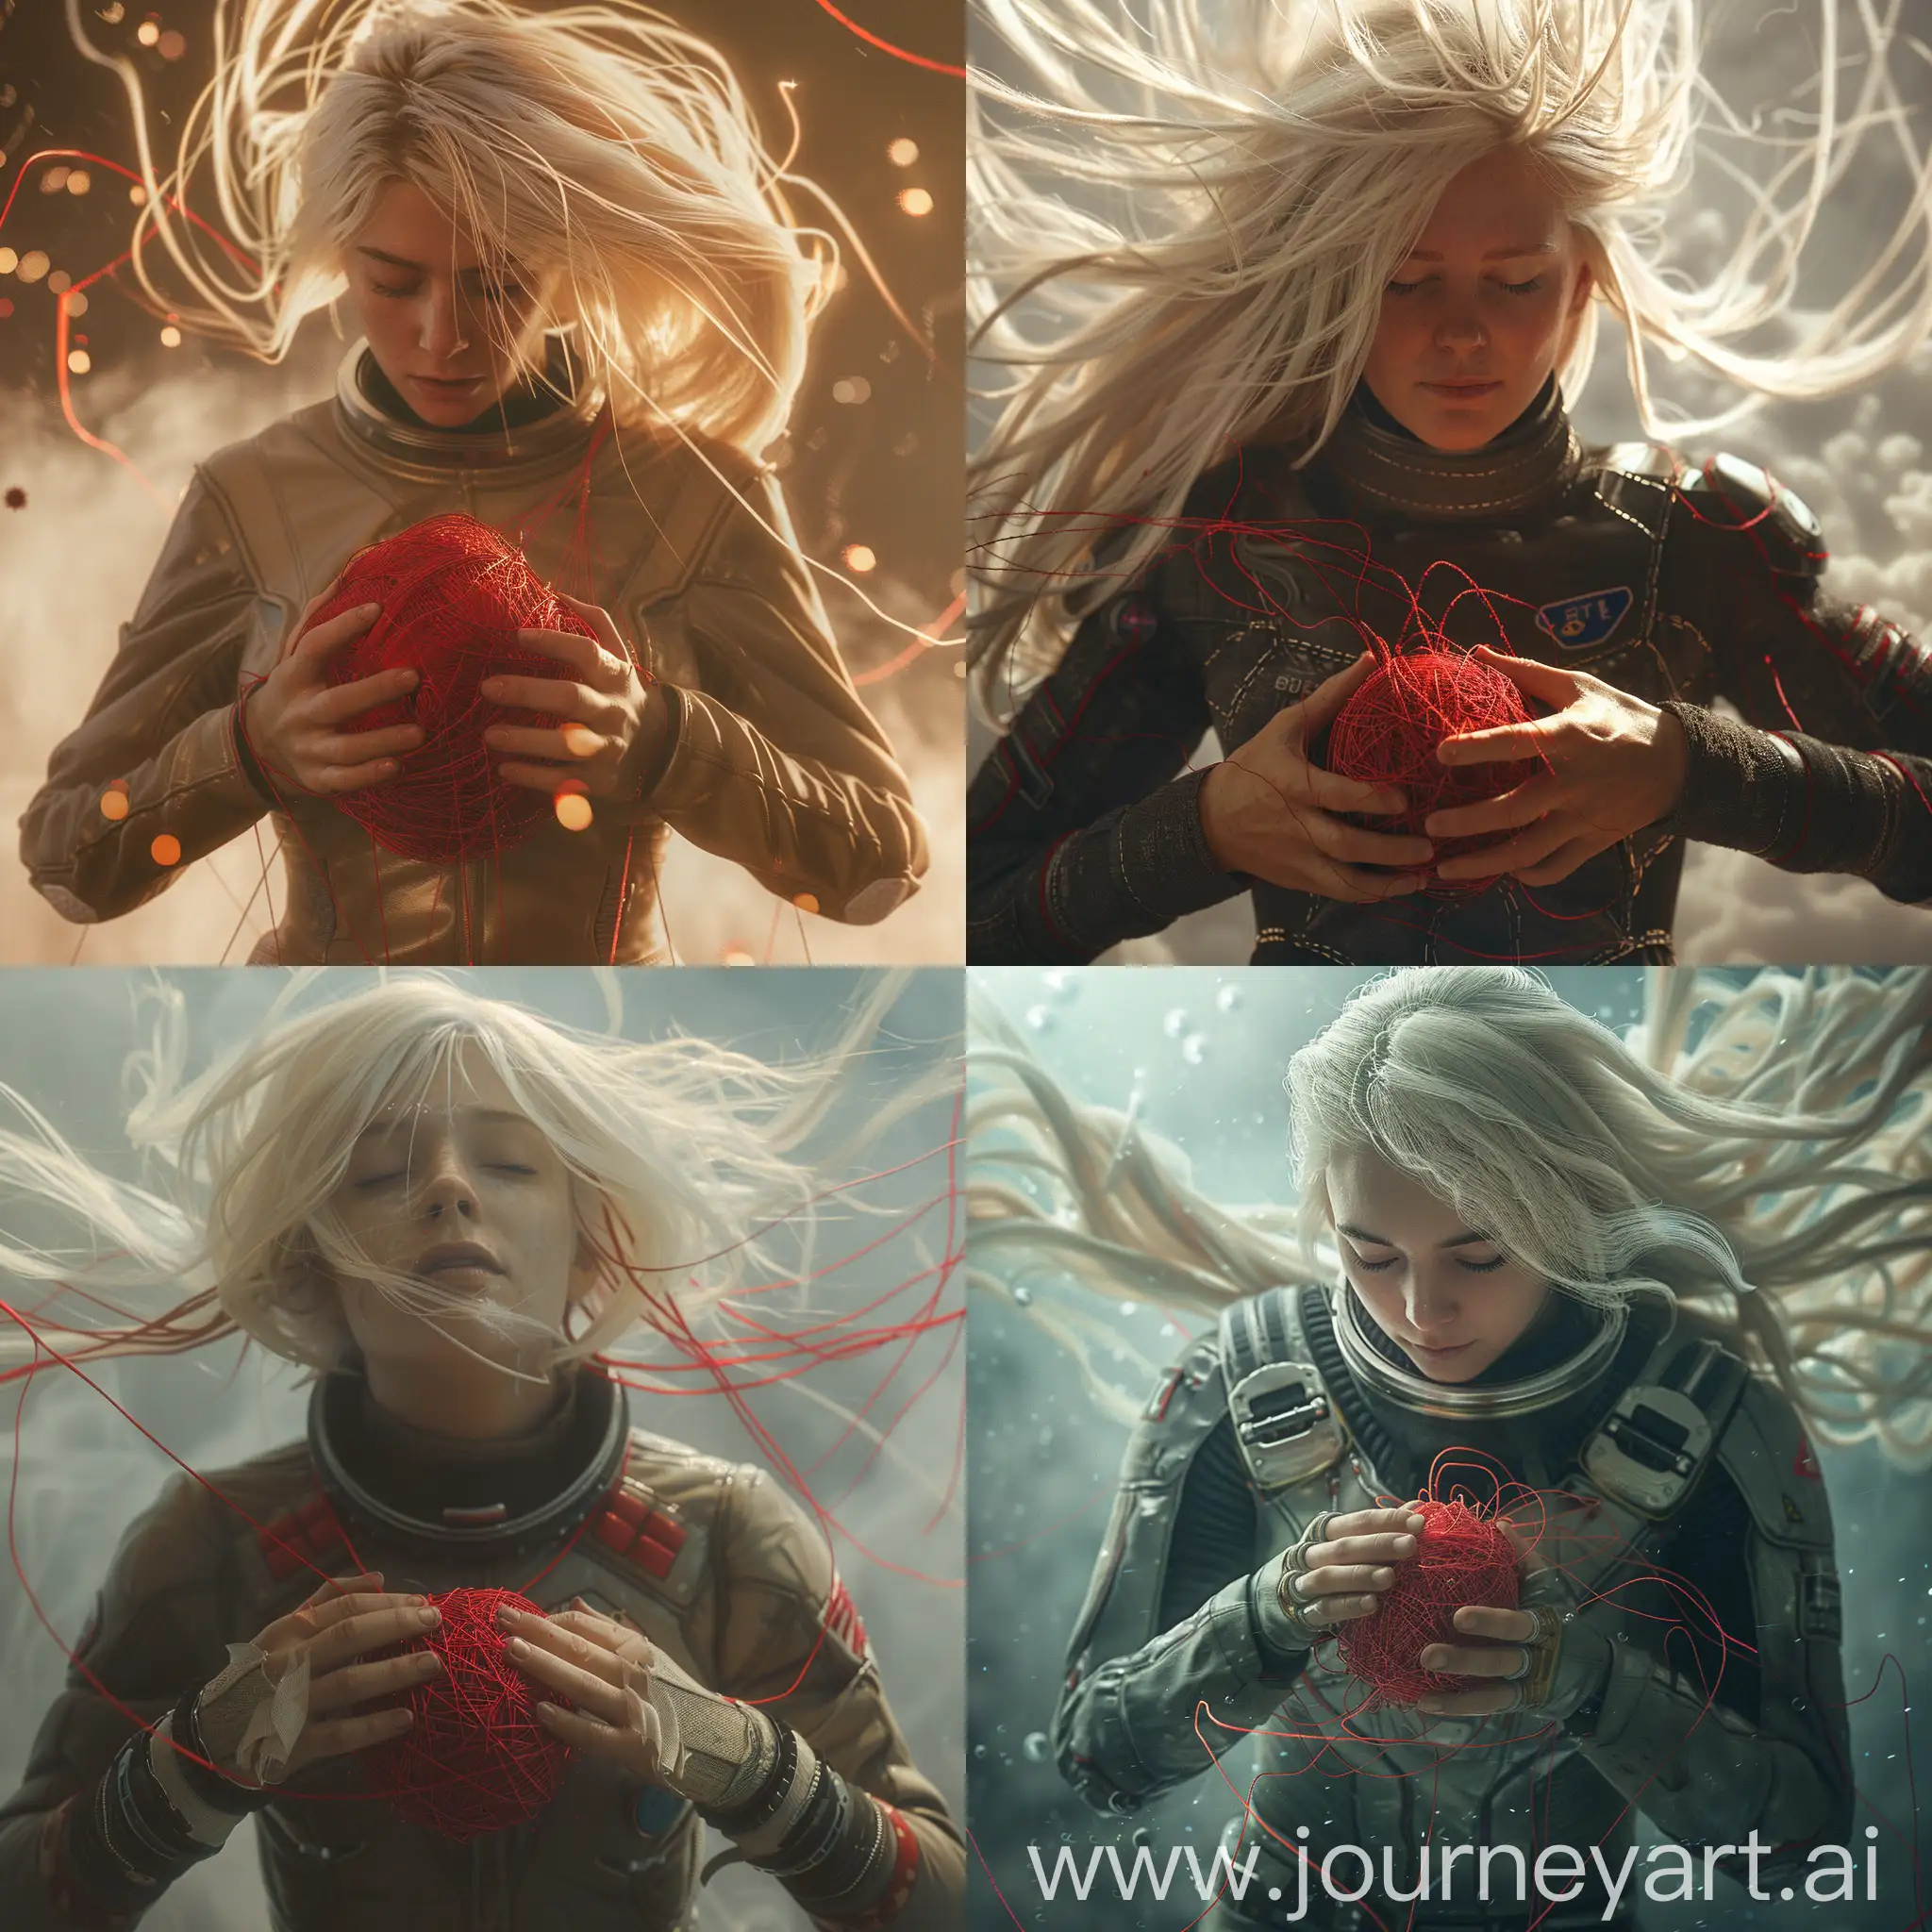 Blonde-Girl-in-Space-Suit-Embracing-Red-Threads-Ball